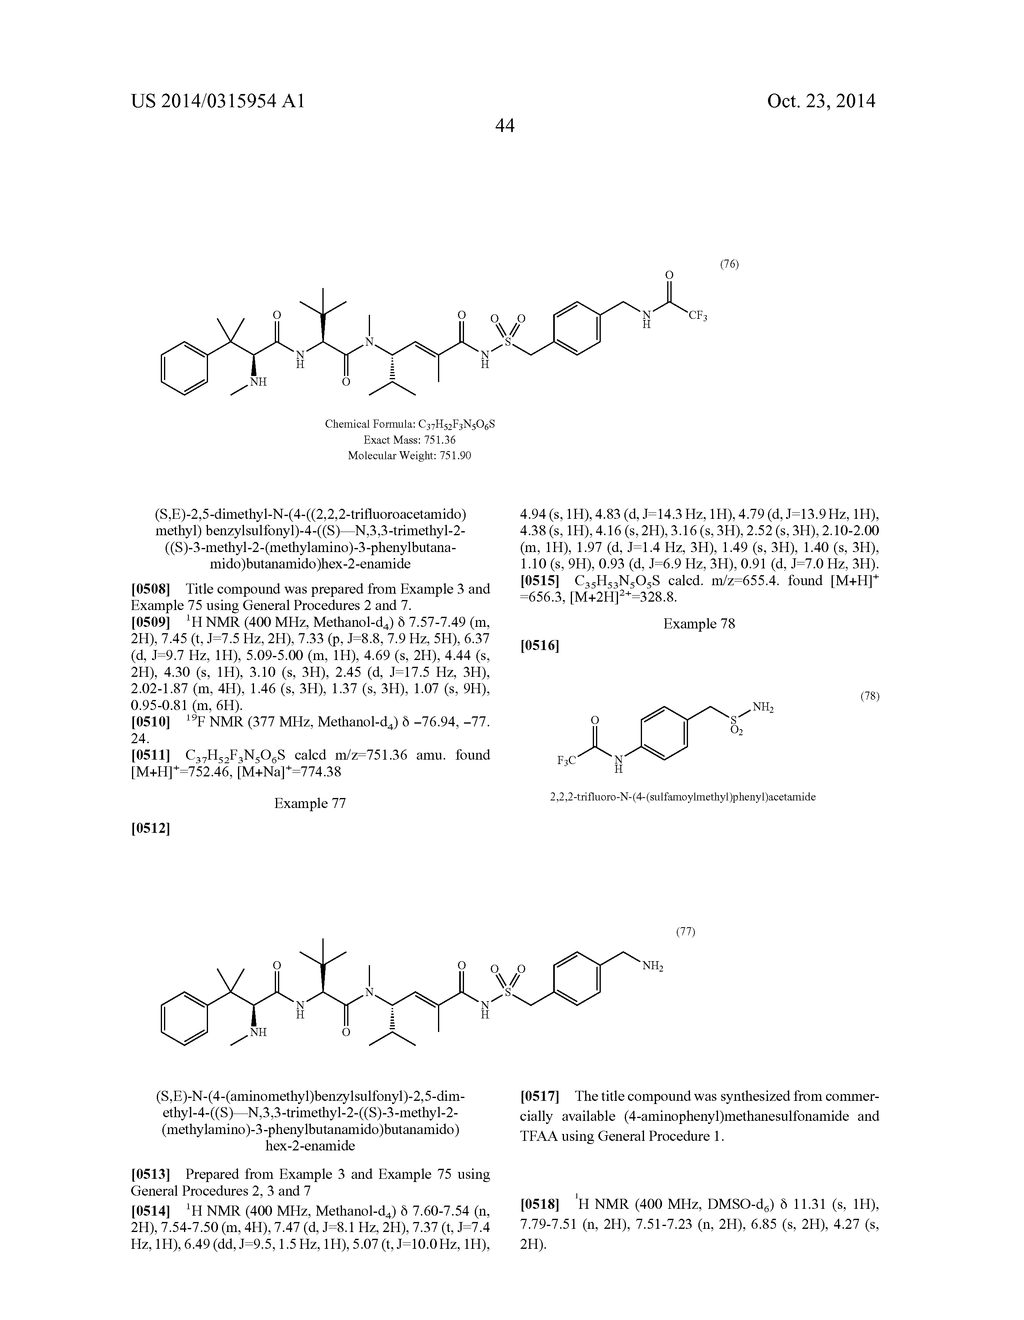 CYTOTOXIC AND ANTI-MITOTIC COMPOUNDS, AND METHODS OF USING THE SAME - diagram, schematic, and image 64